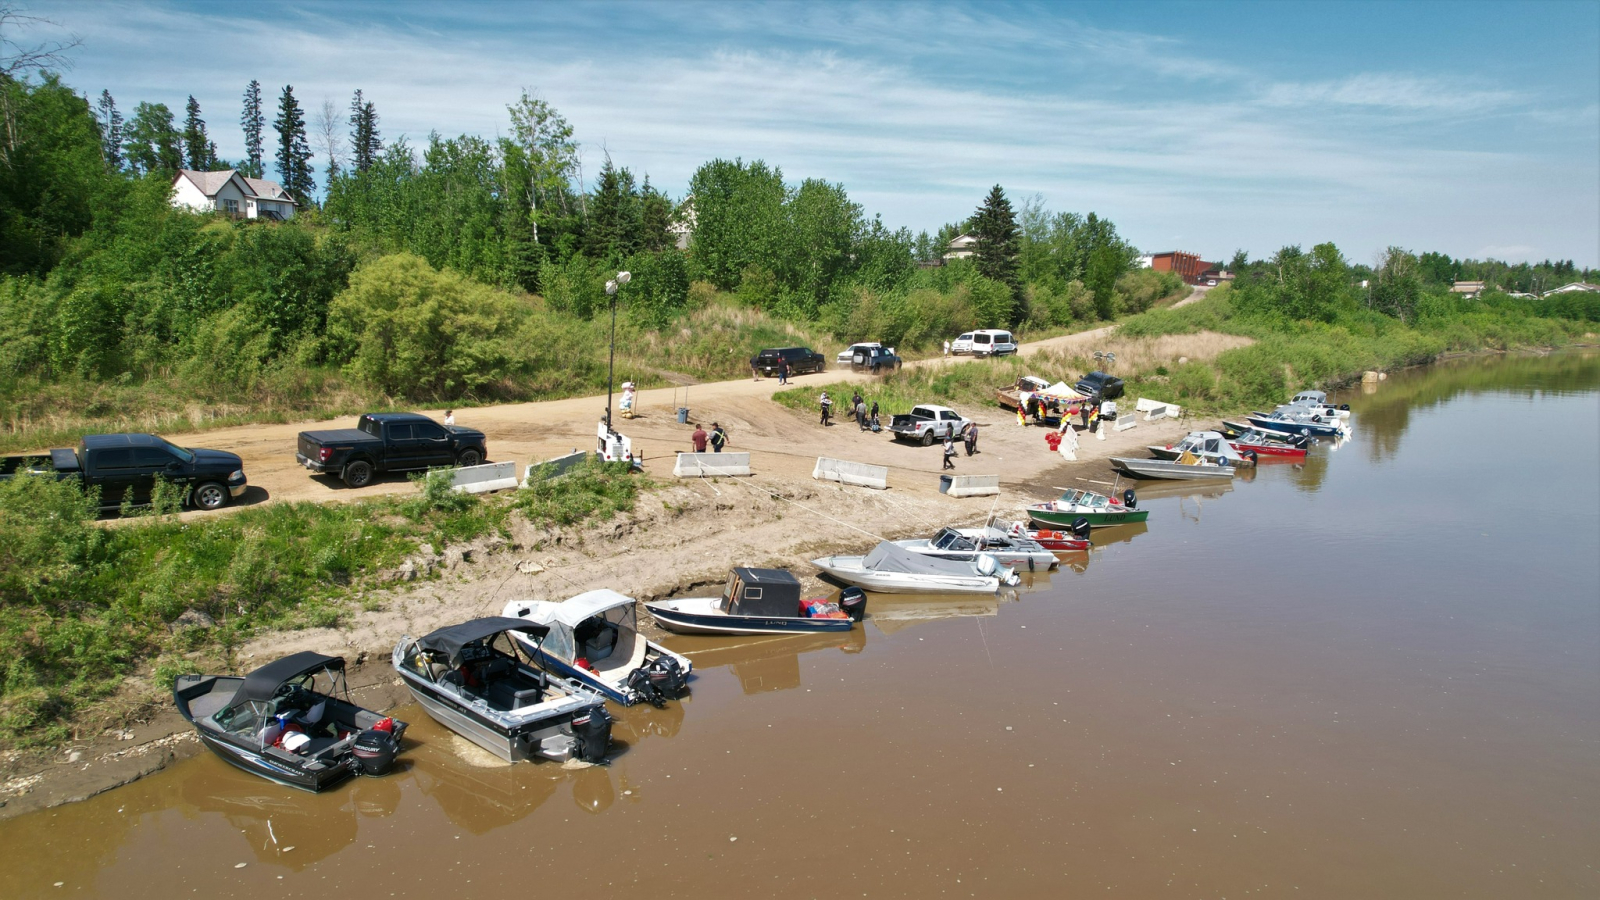 Boats and trucks line the shore of a river